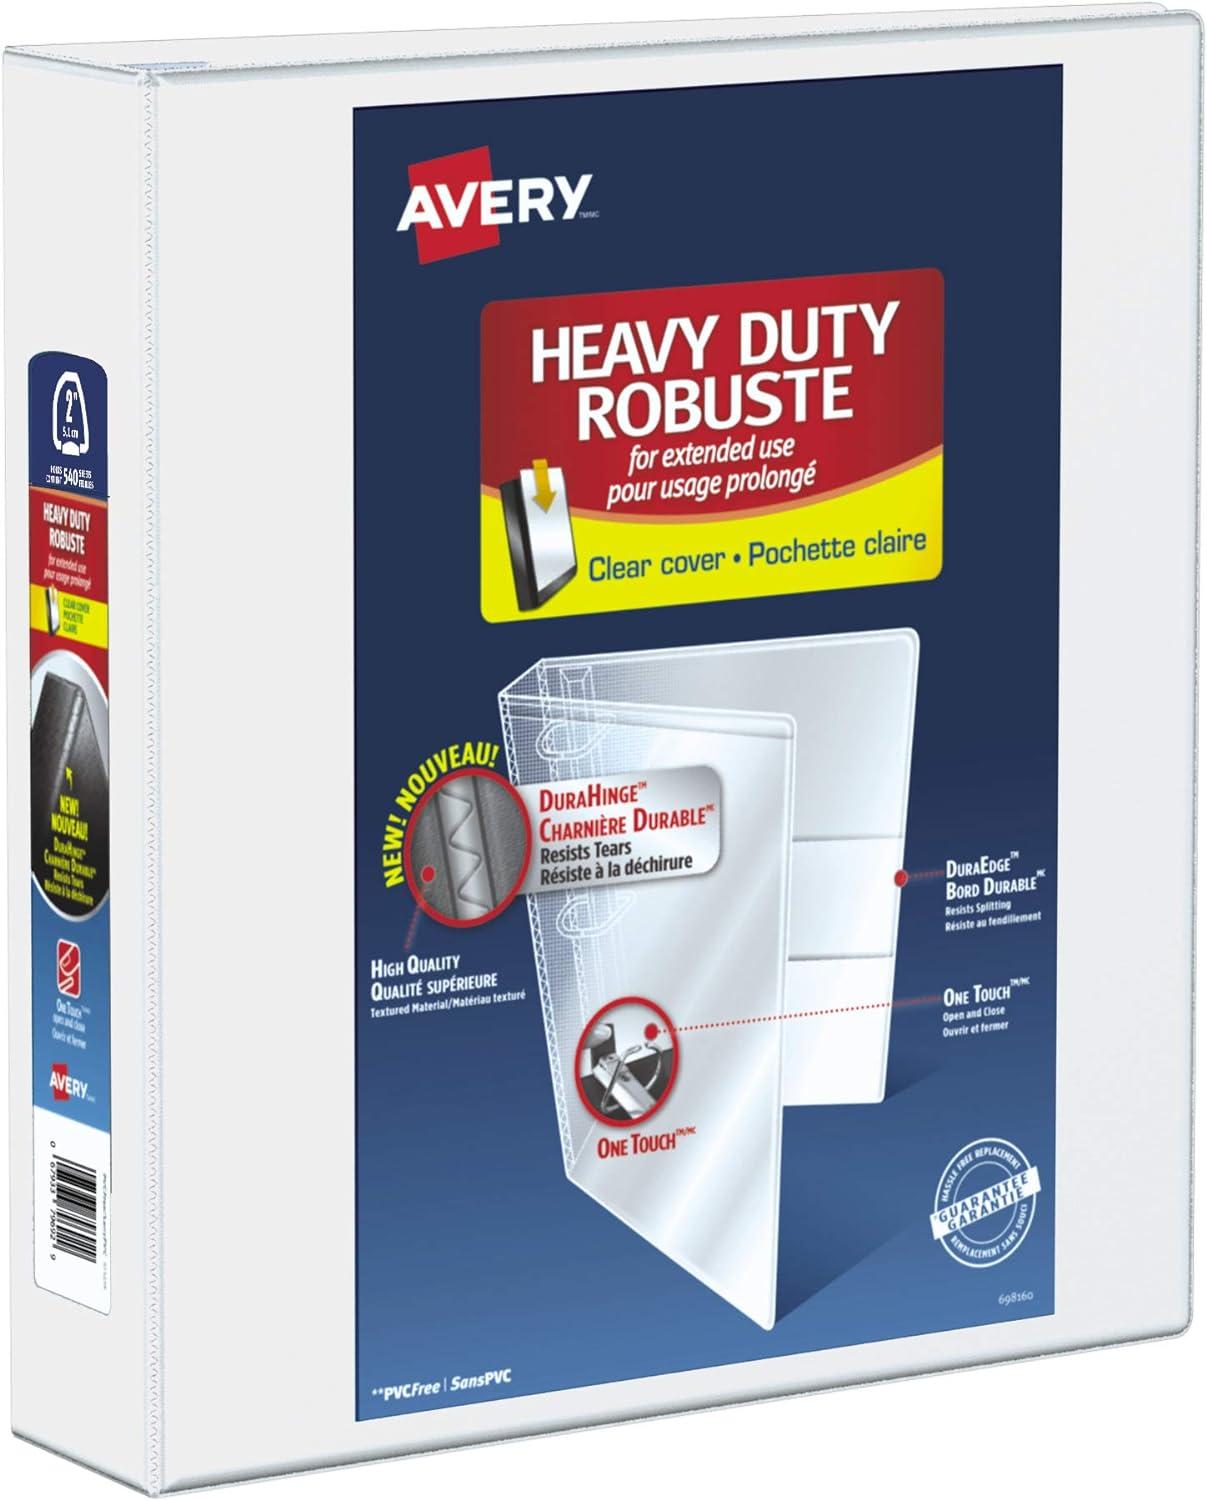 avery heavy duty view 3 ring binder 2 inch one touch white 4 pockets 540 sheet capacity pvc free 79792  avery